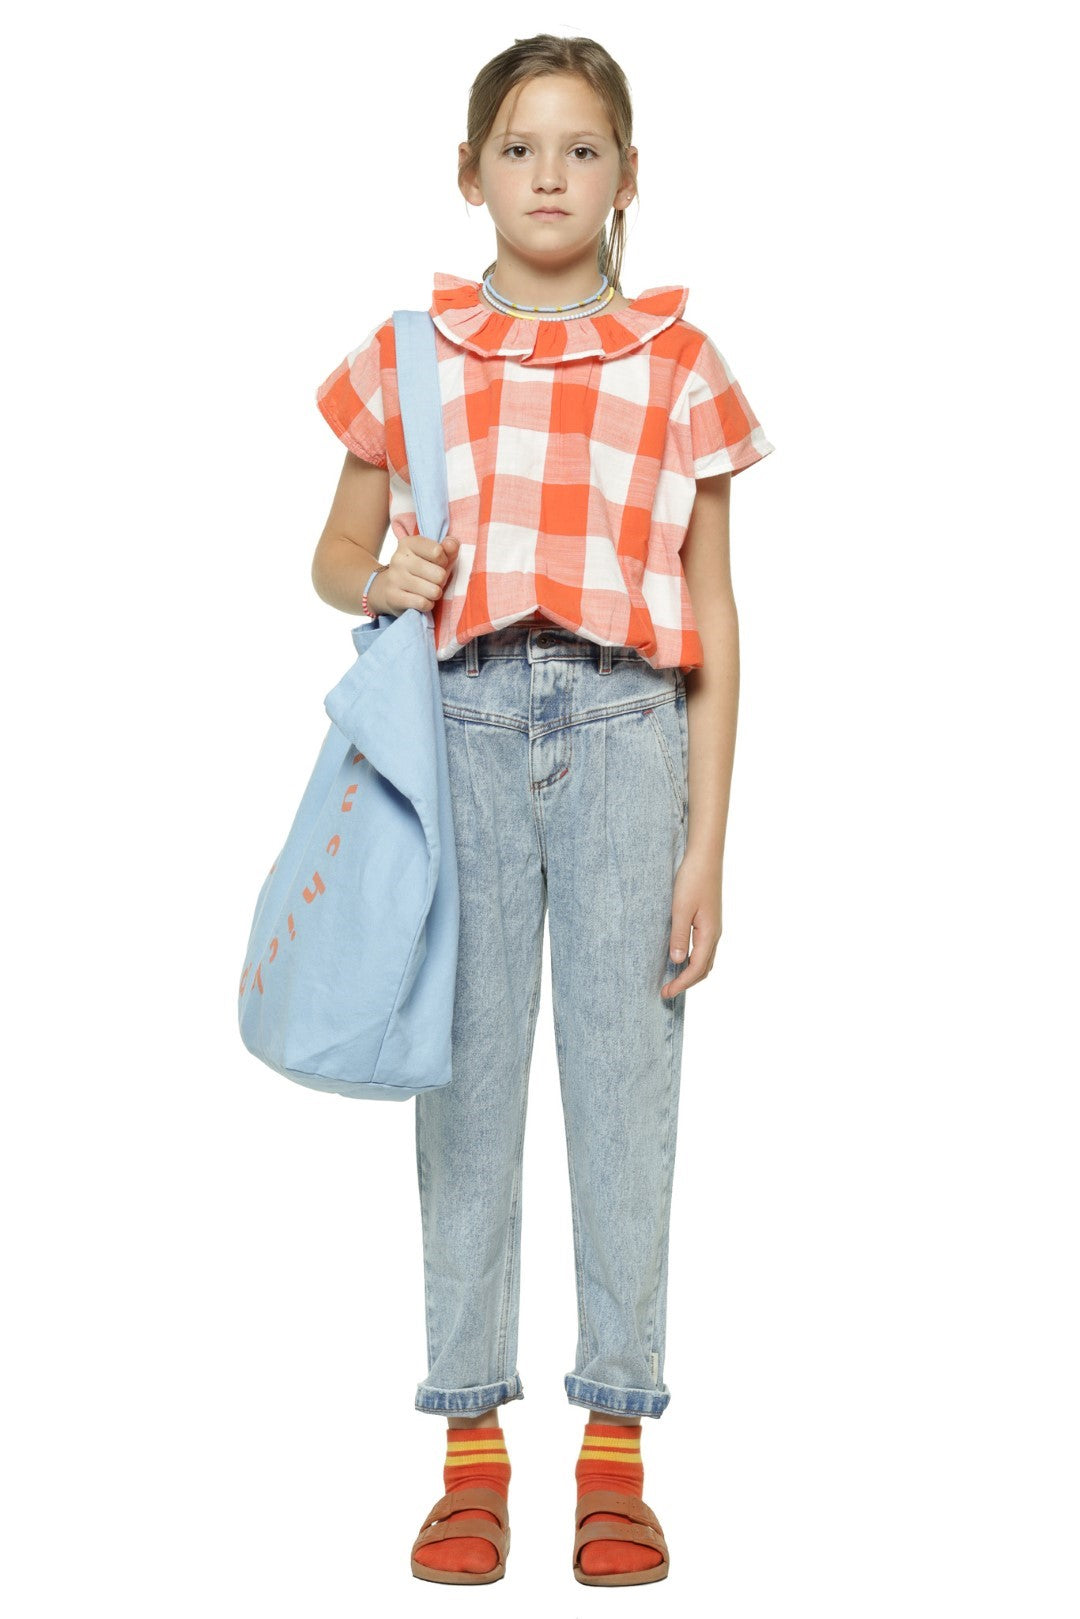 Sleeveless Blouse With Collar Red &amp; White Checkered